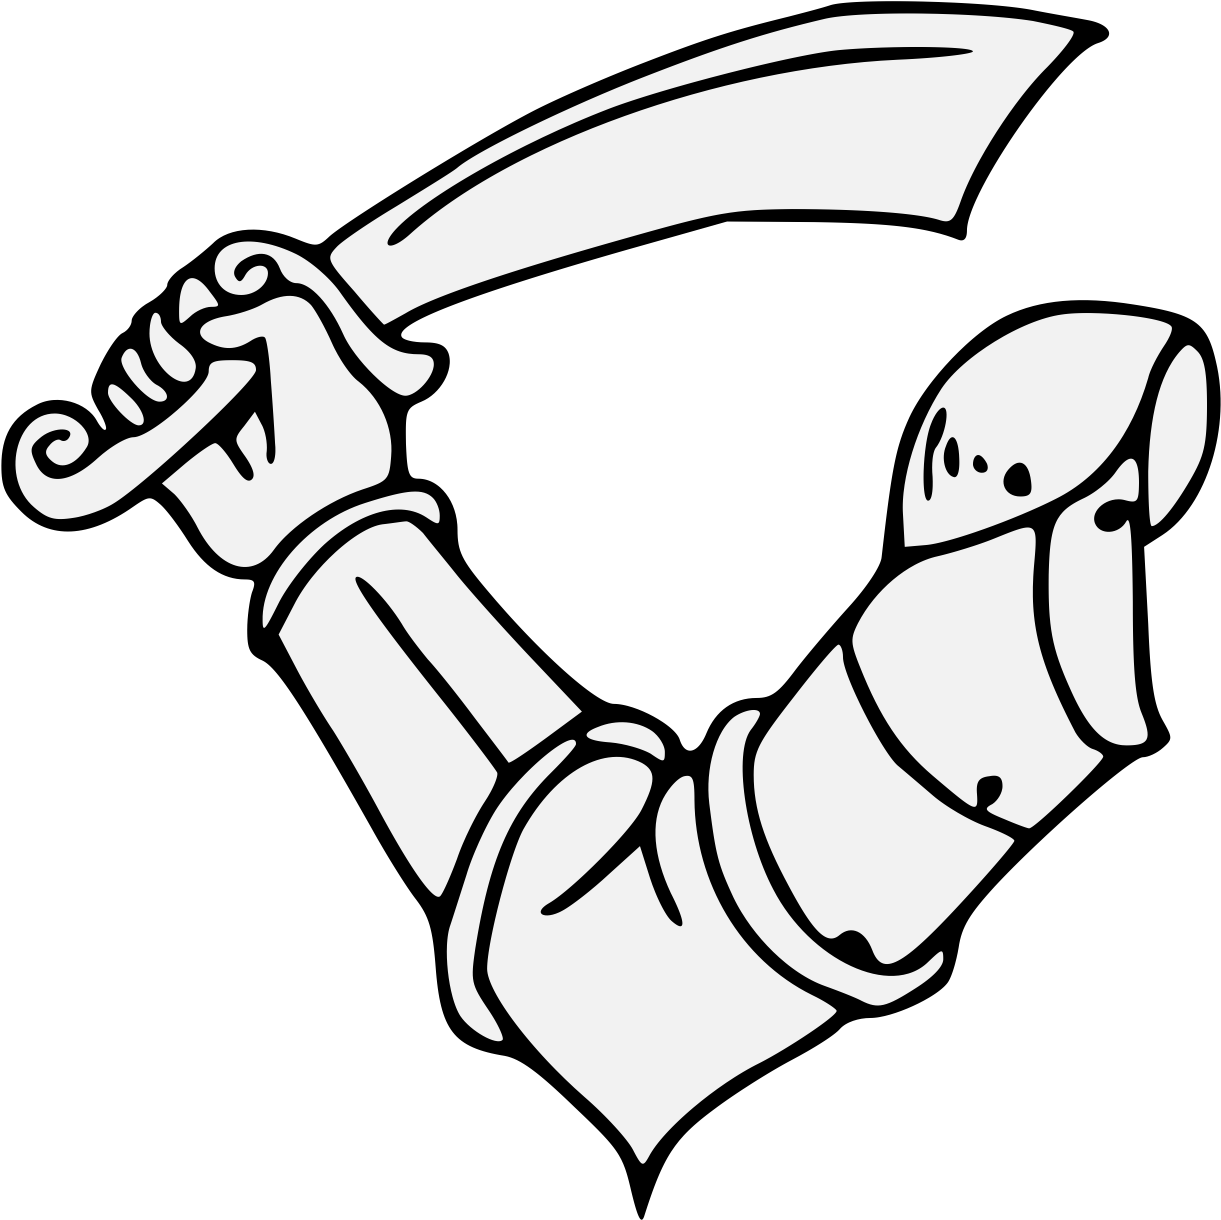 Arm In Armor Fesswise Embowed Brandishing A Sword - Arm With Sword Png (1238x1247)